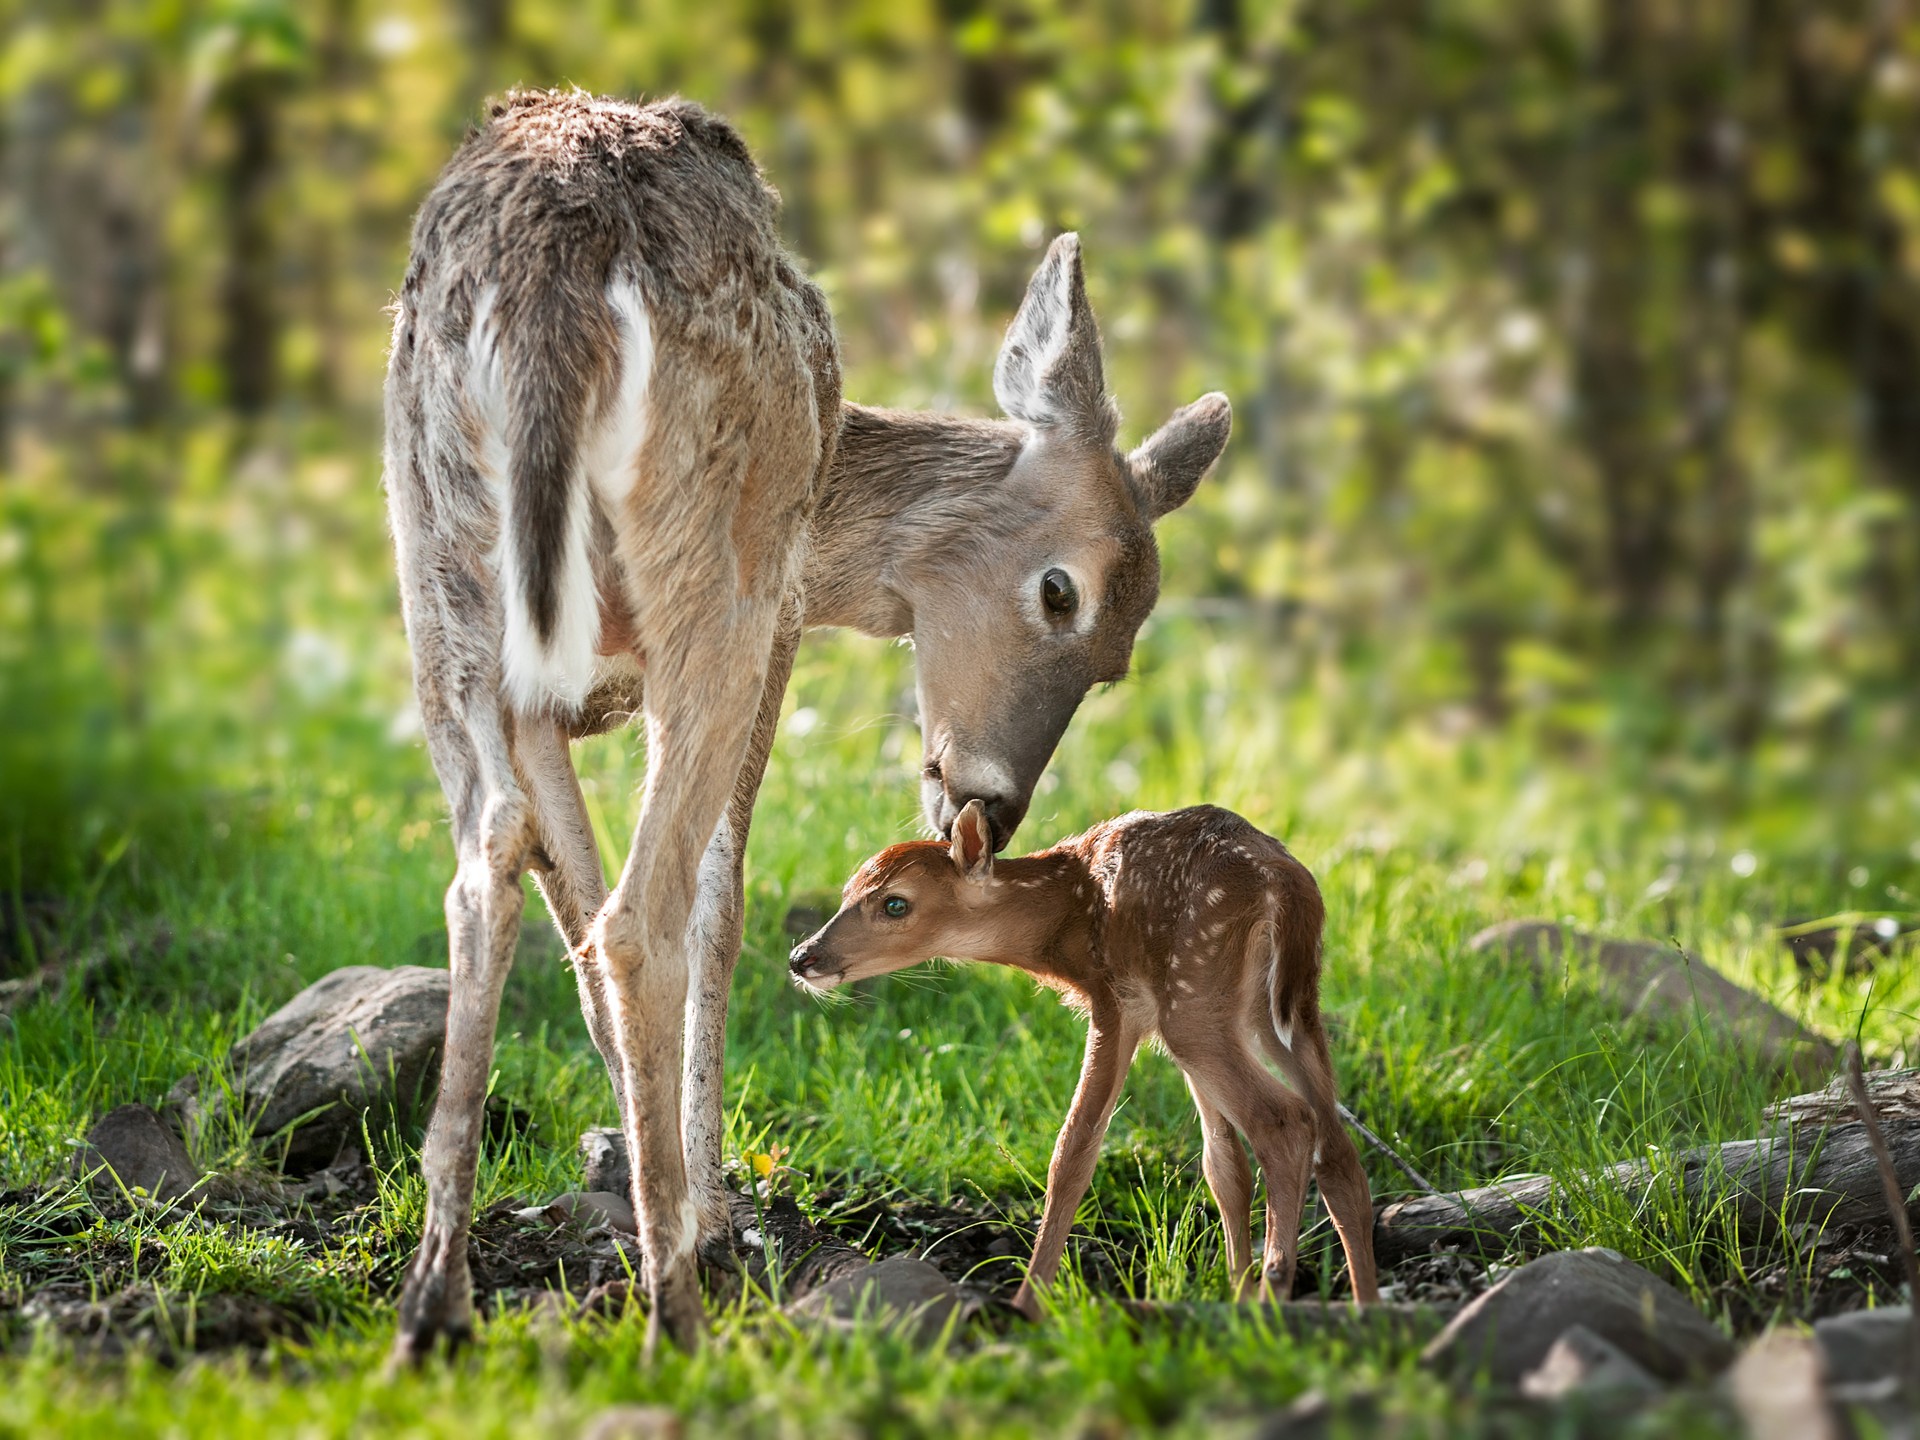 Spring Picture With Deer - HD Wallpaper 